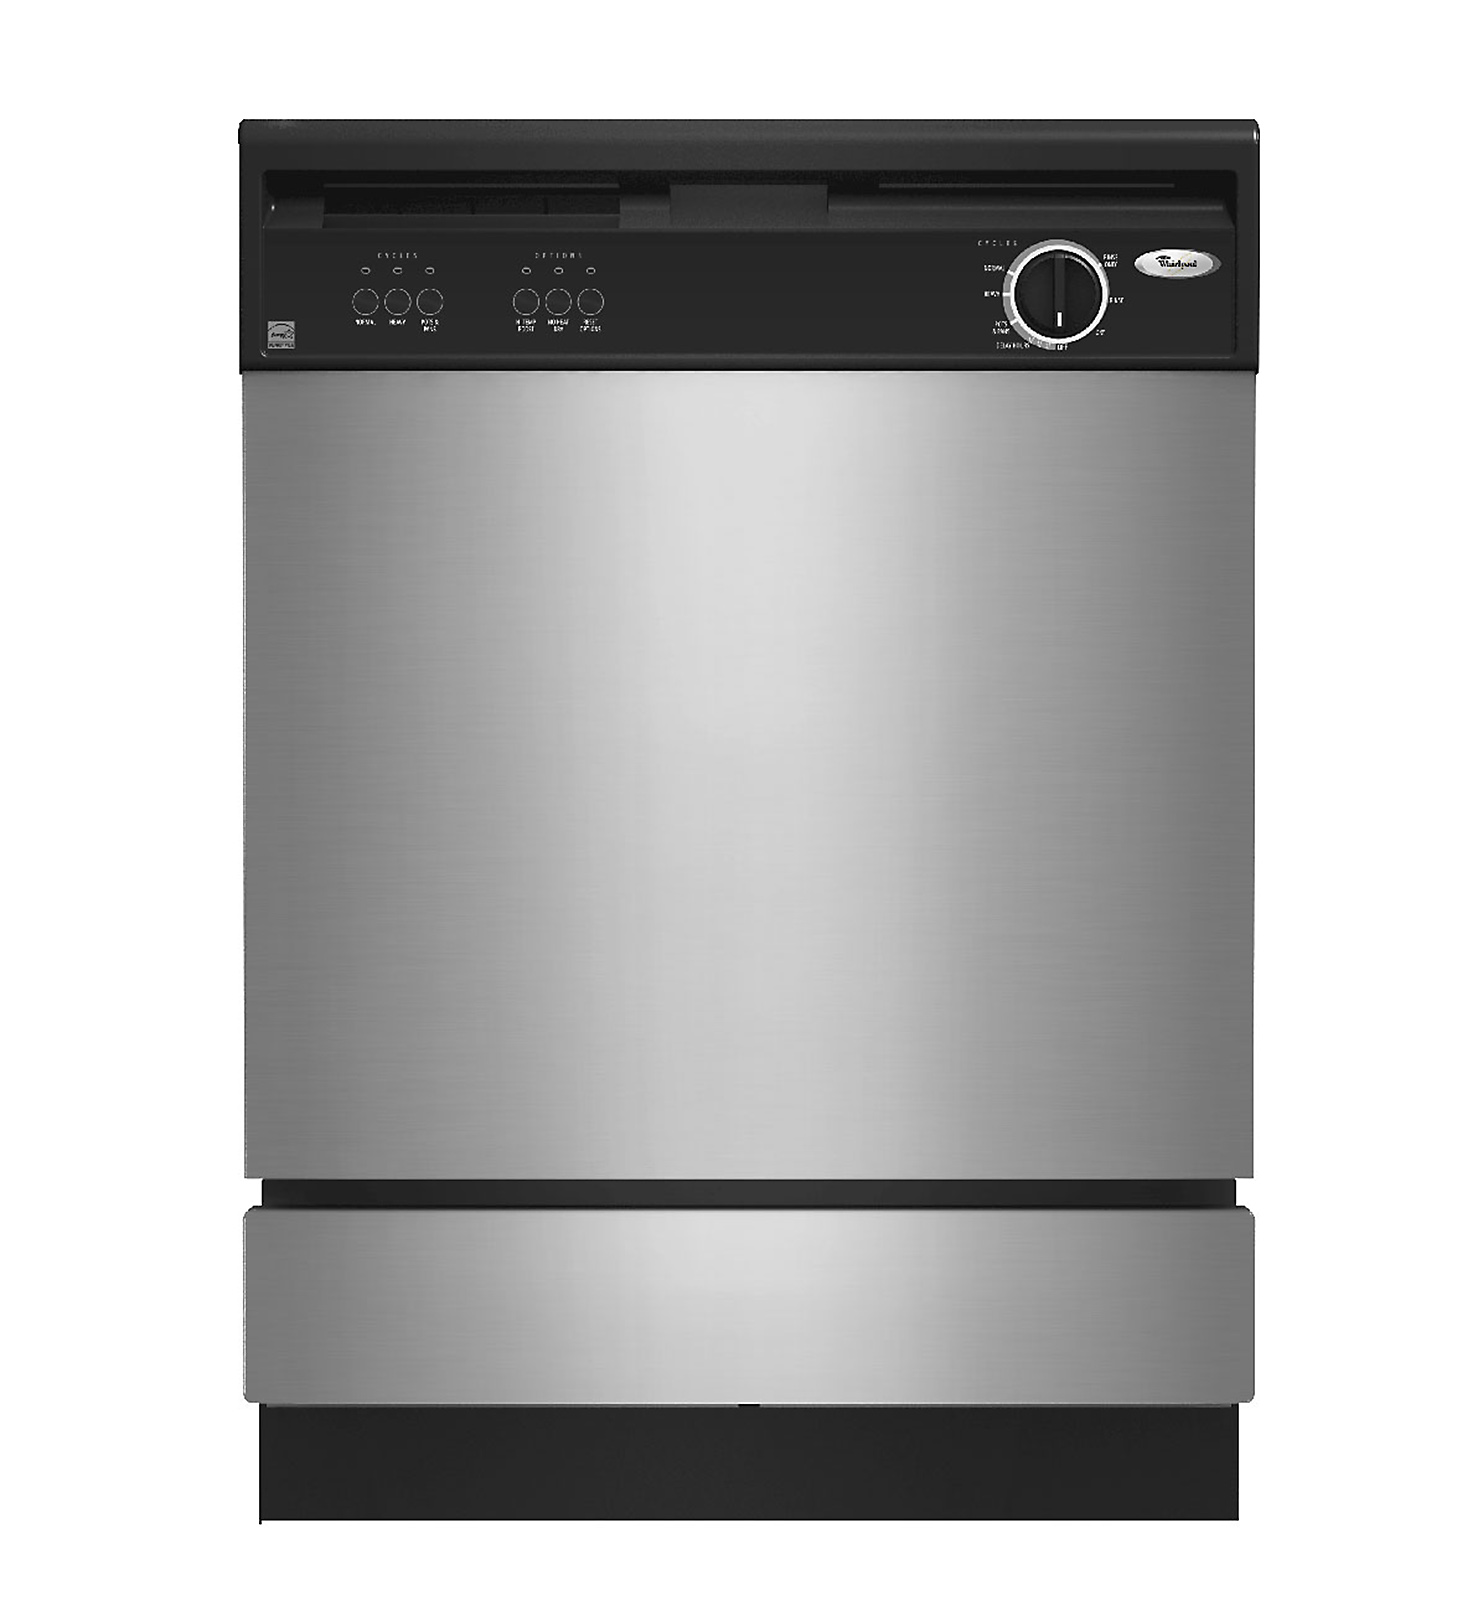 Whirlpool - DU850SWPS - 24" Built-In Dishwasher with DuraWash™ System Whirlpool Stainless Steel Built-in Dishwasher